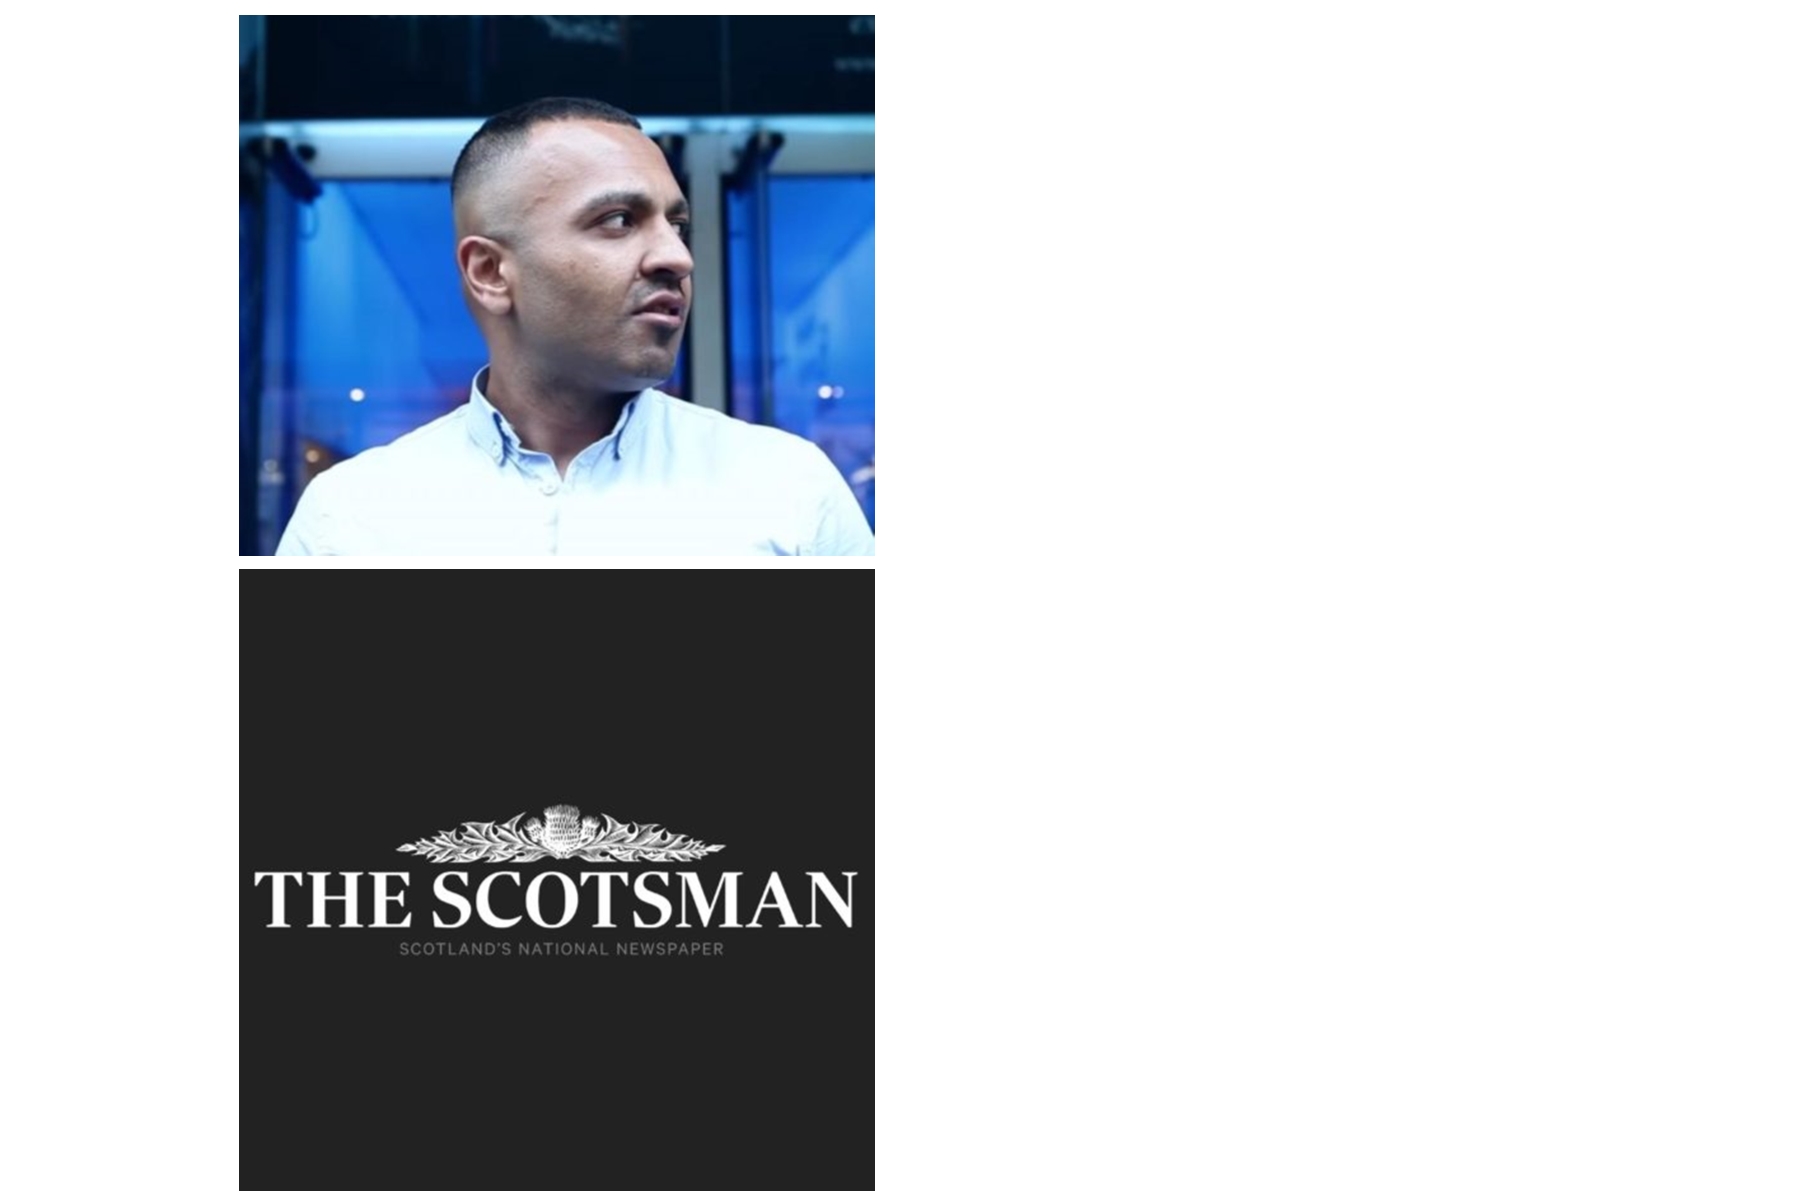 The Scotsman Newspaper Lied: Police Wrongfully Arrest Man In Connection With Alleged “Pick-Up Artist” Videos, After News Outlets Followed A Predetermined Narrative Against Him